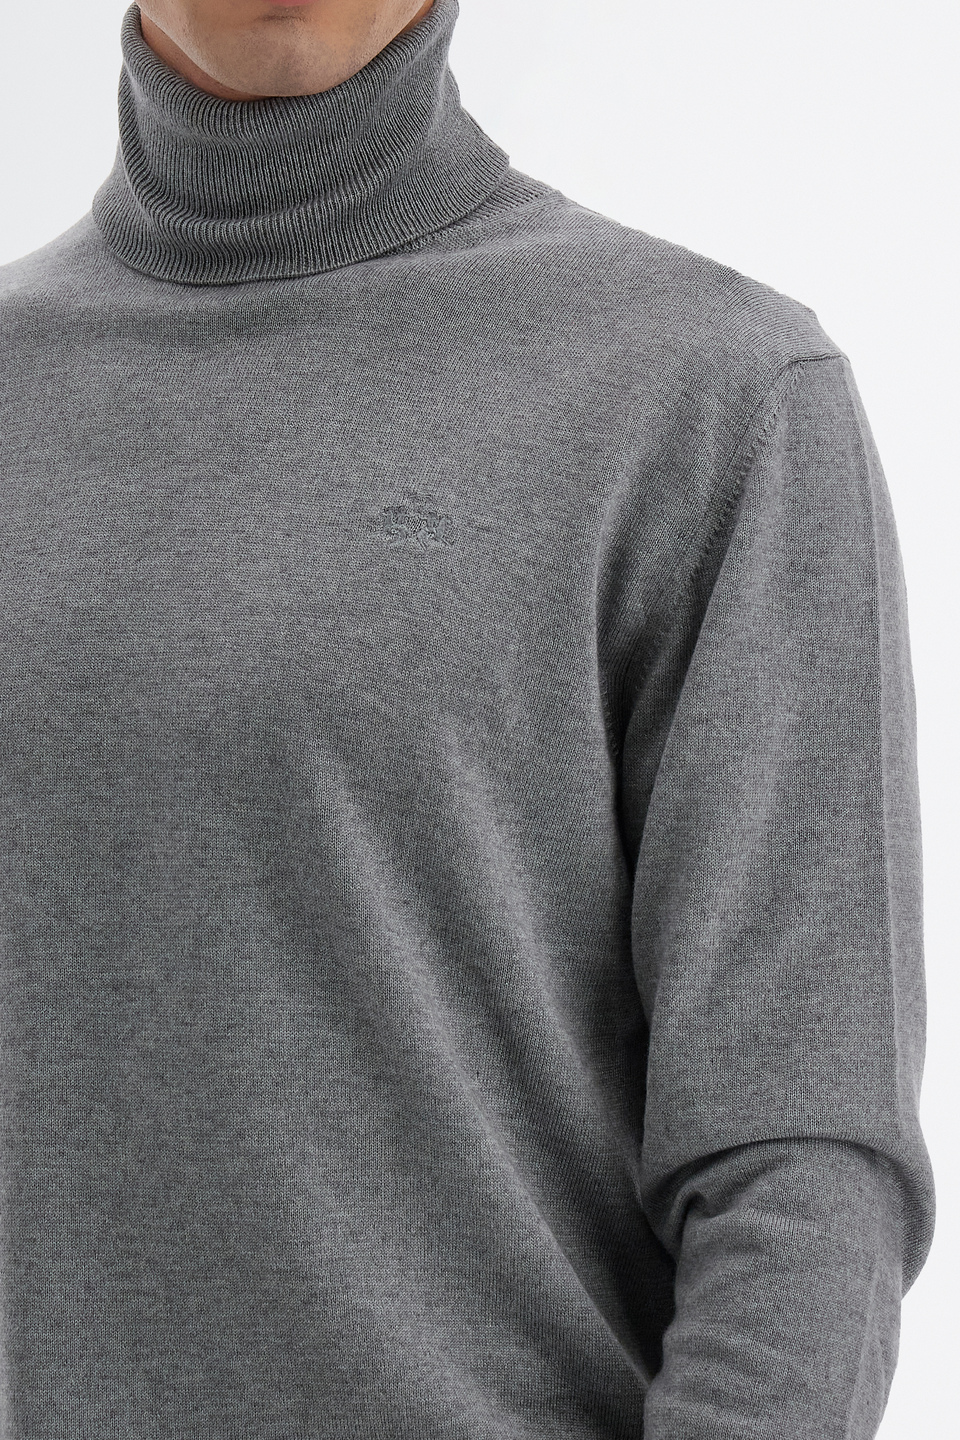 Men’s sweater with long sleeves high neck in cotton and wool blend regular fit | La Martina - Official Online Shop